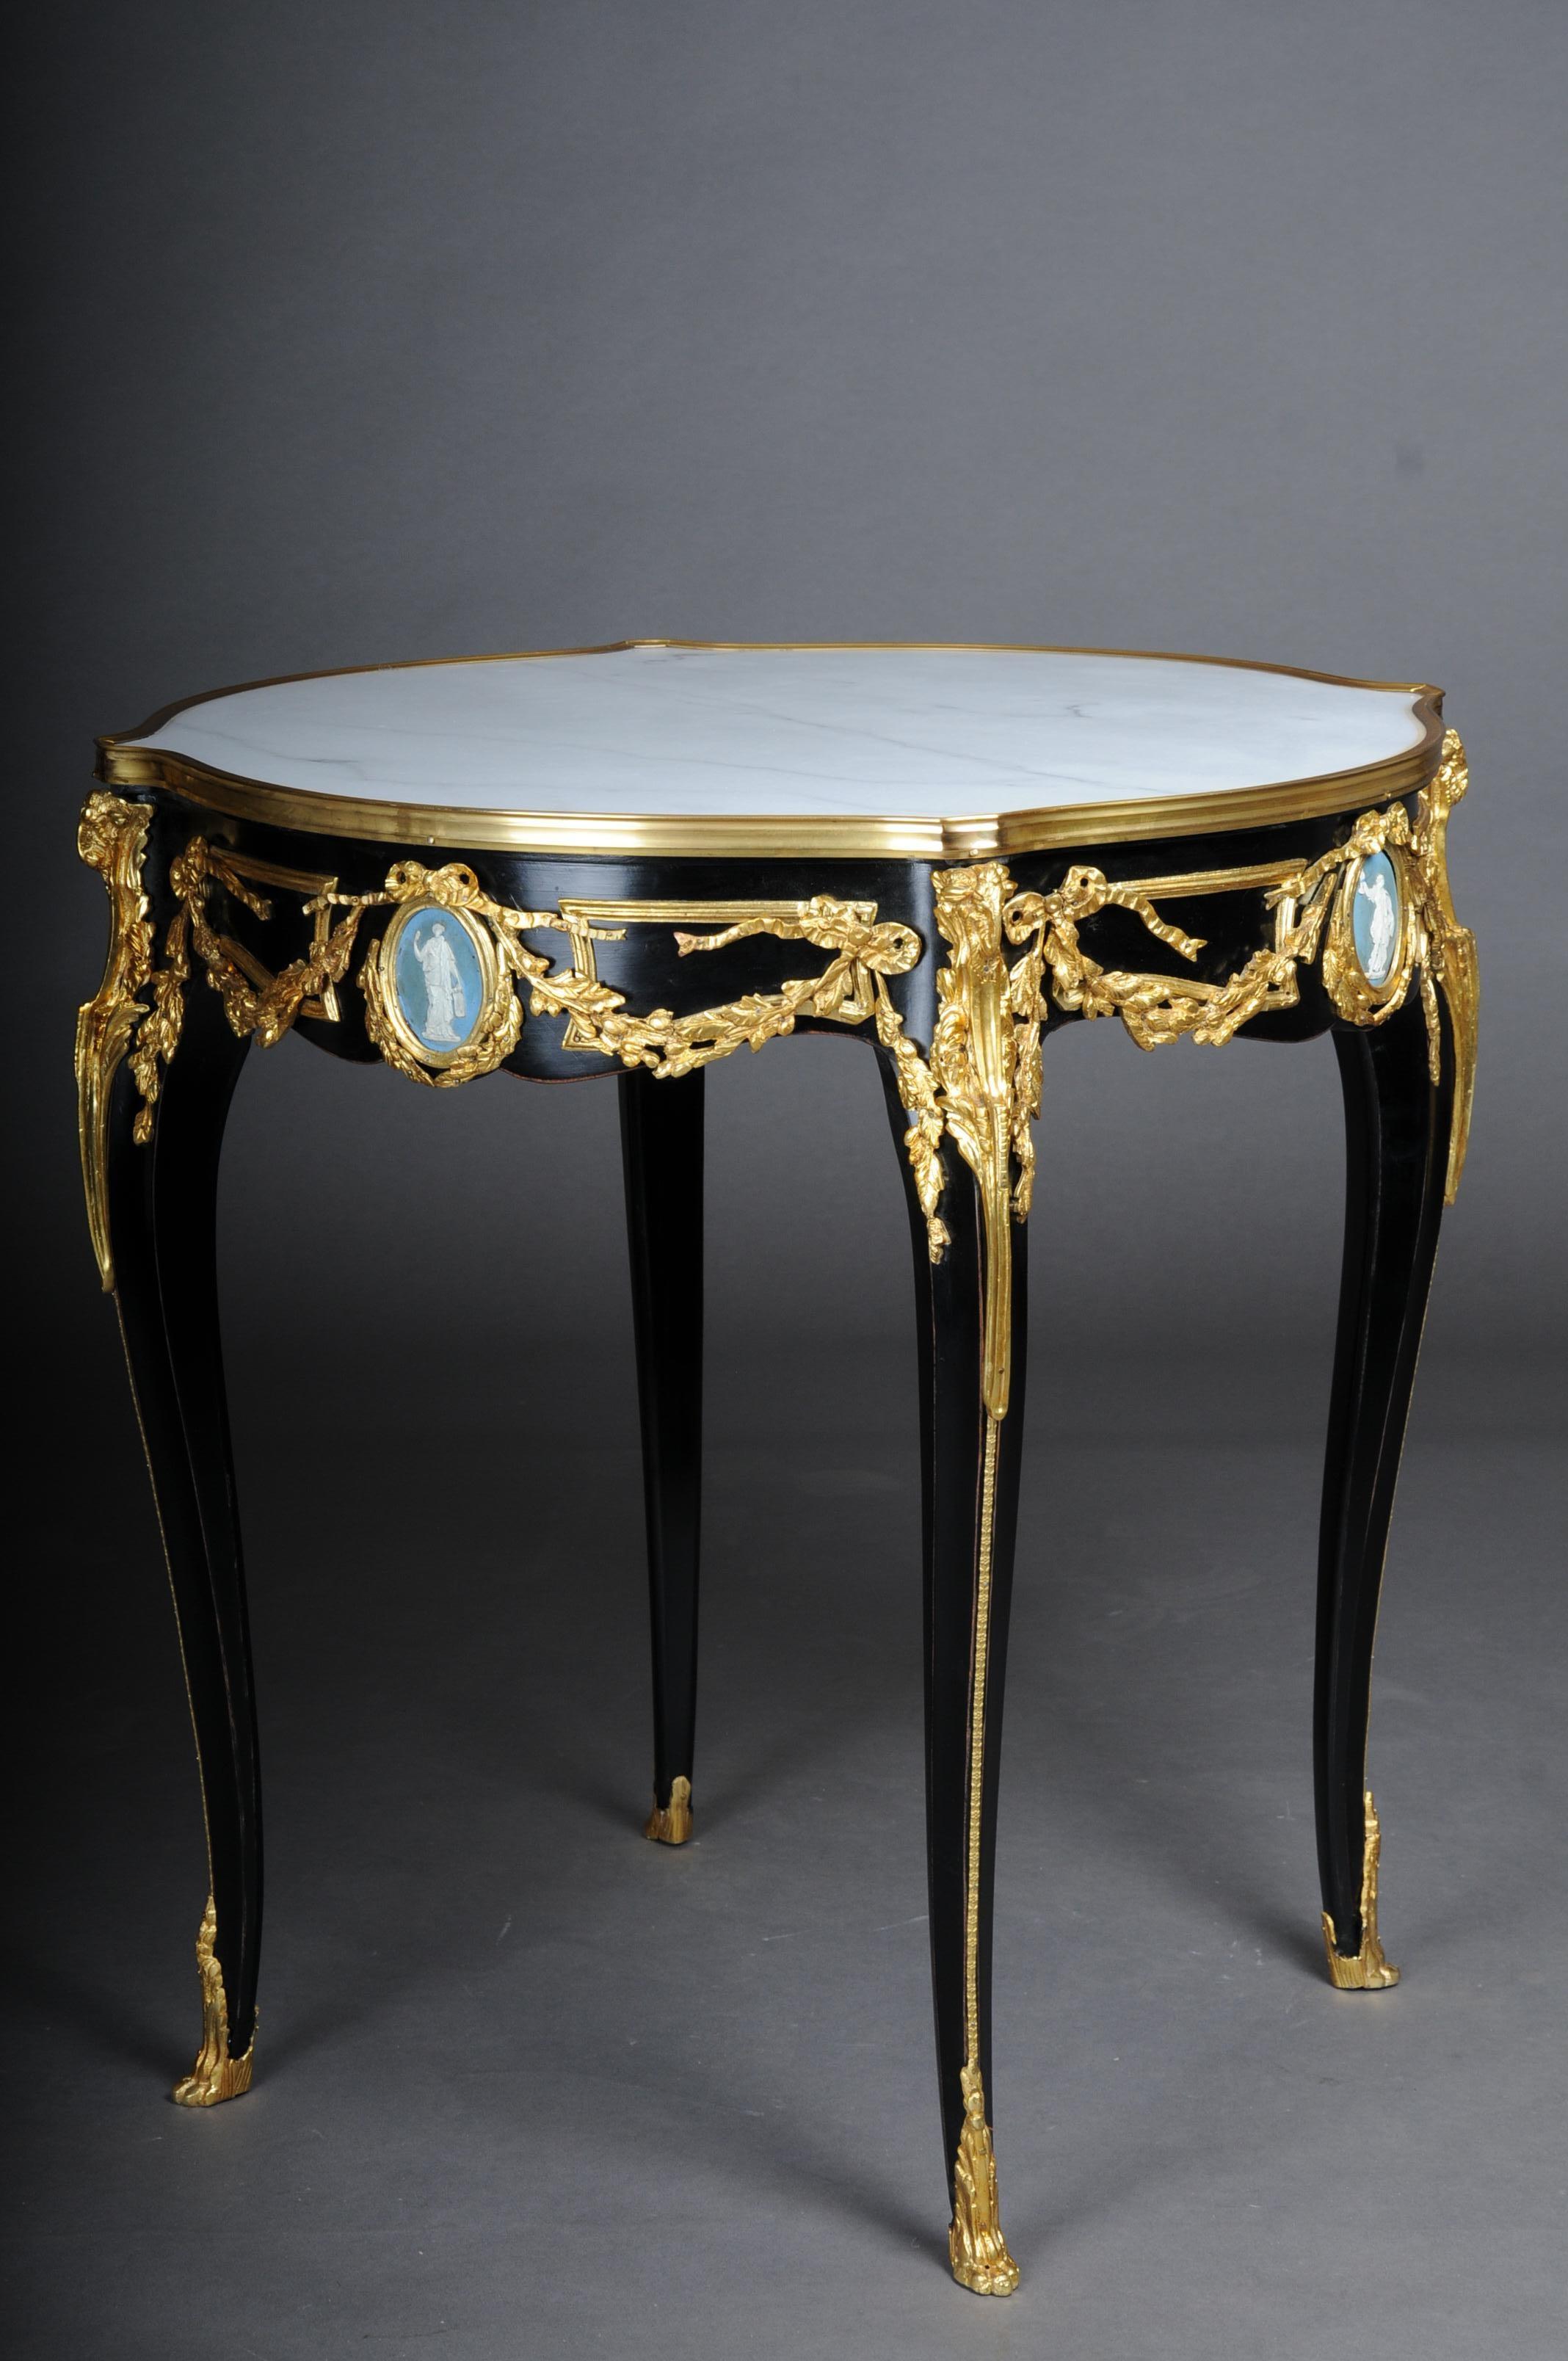 20th Century Classic side table, gilt bronze, black, Louis XV

Solid beech body, blackened with rich brass bronze decorations, gilded. Round white marble top with gilt frame. The marble top has a stunning mottle. Each frame stripe centers a